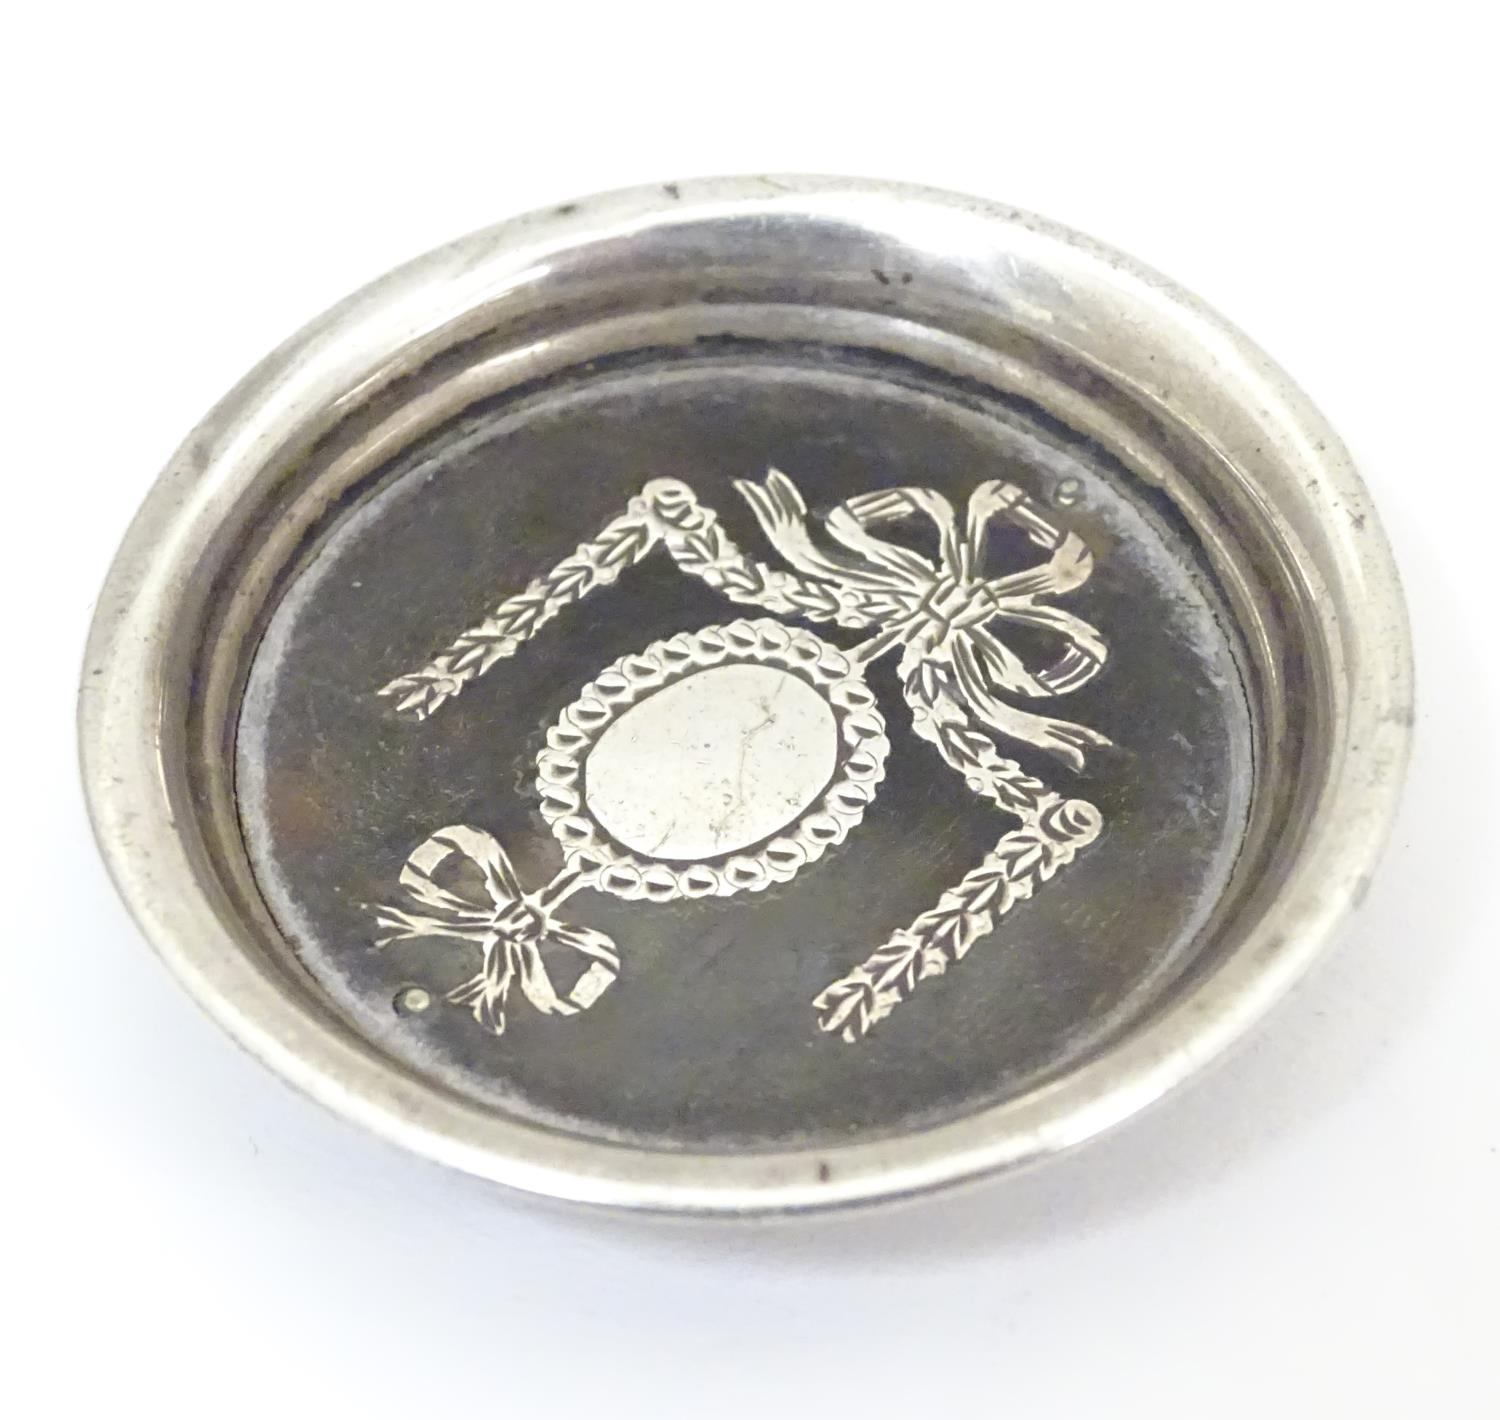 A white metal and tortoiseshell miniature dish with piquet style decoration. Approx. 1 1/2" diameter